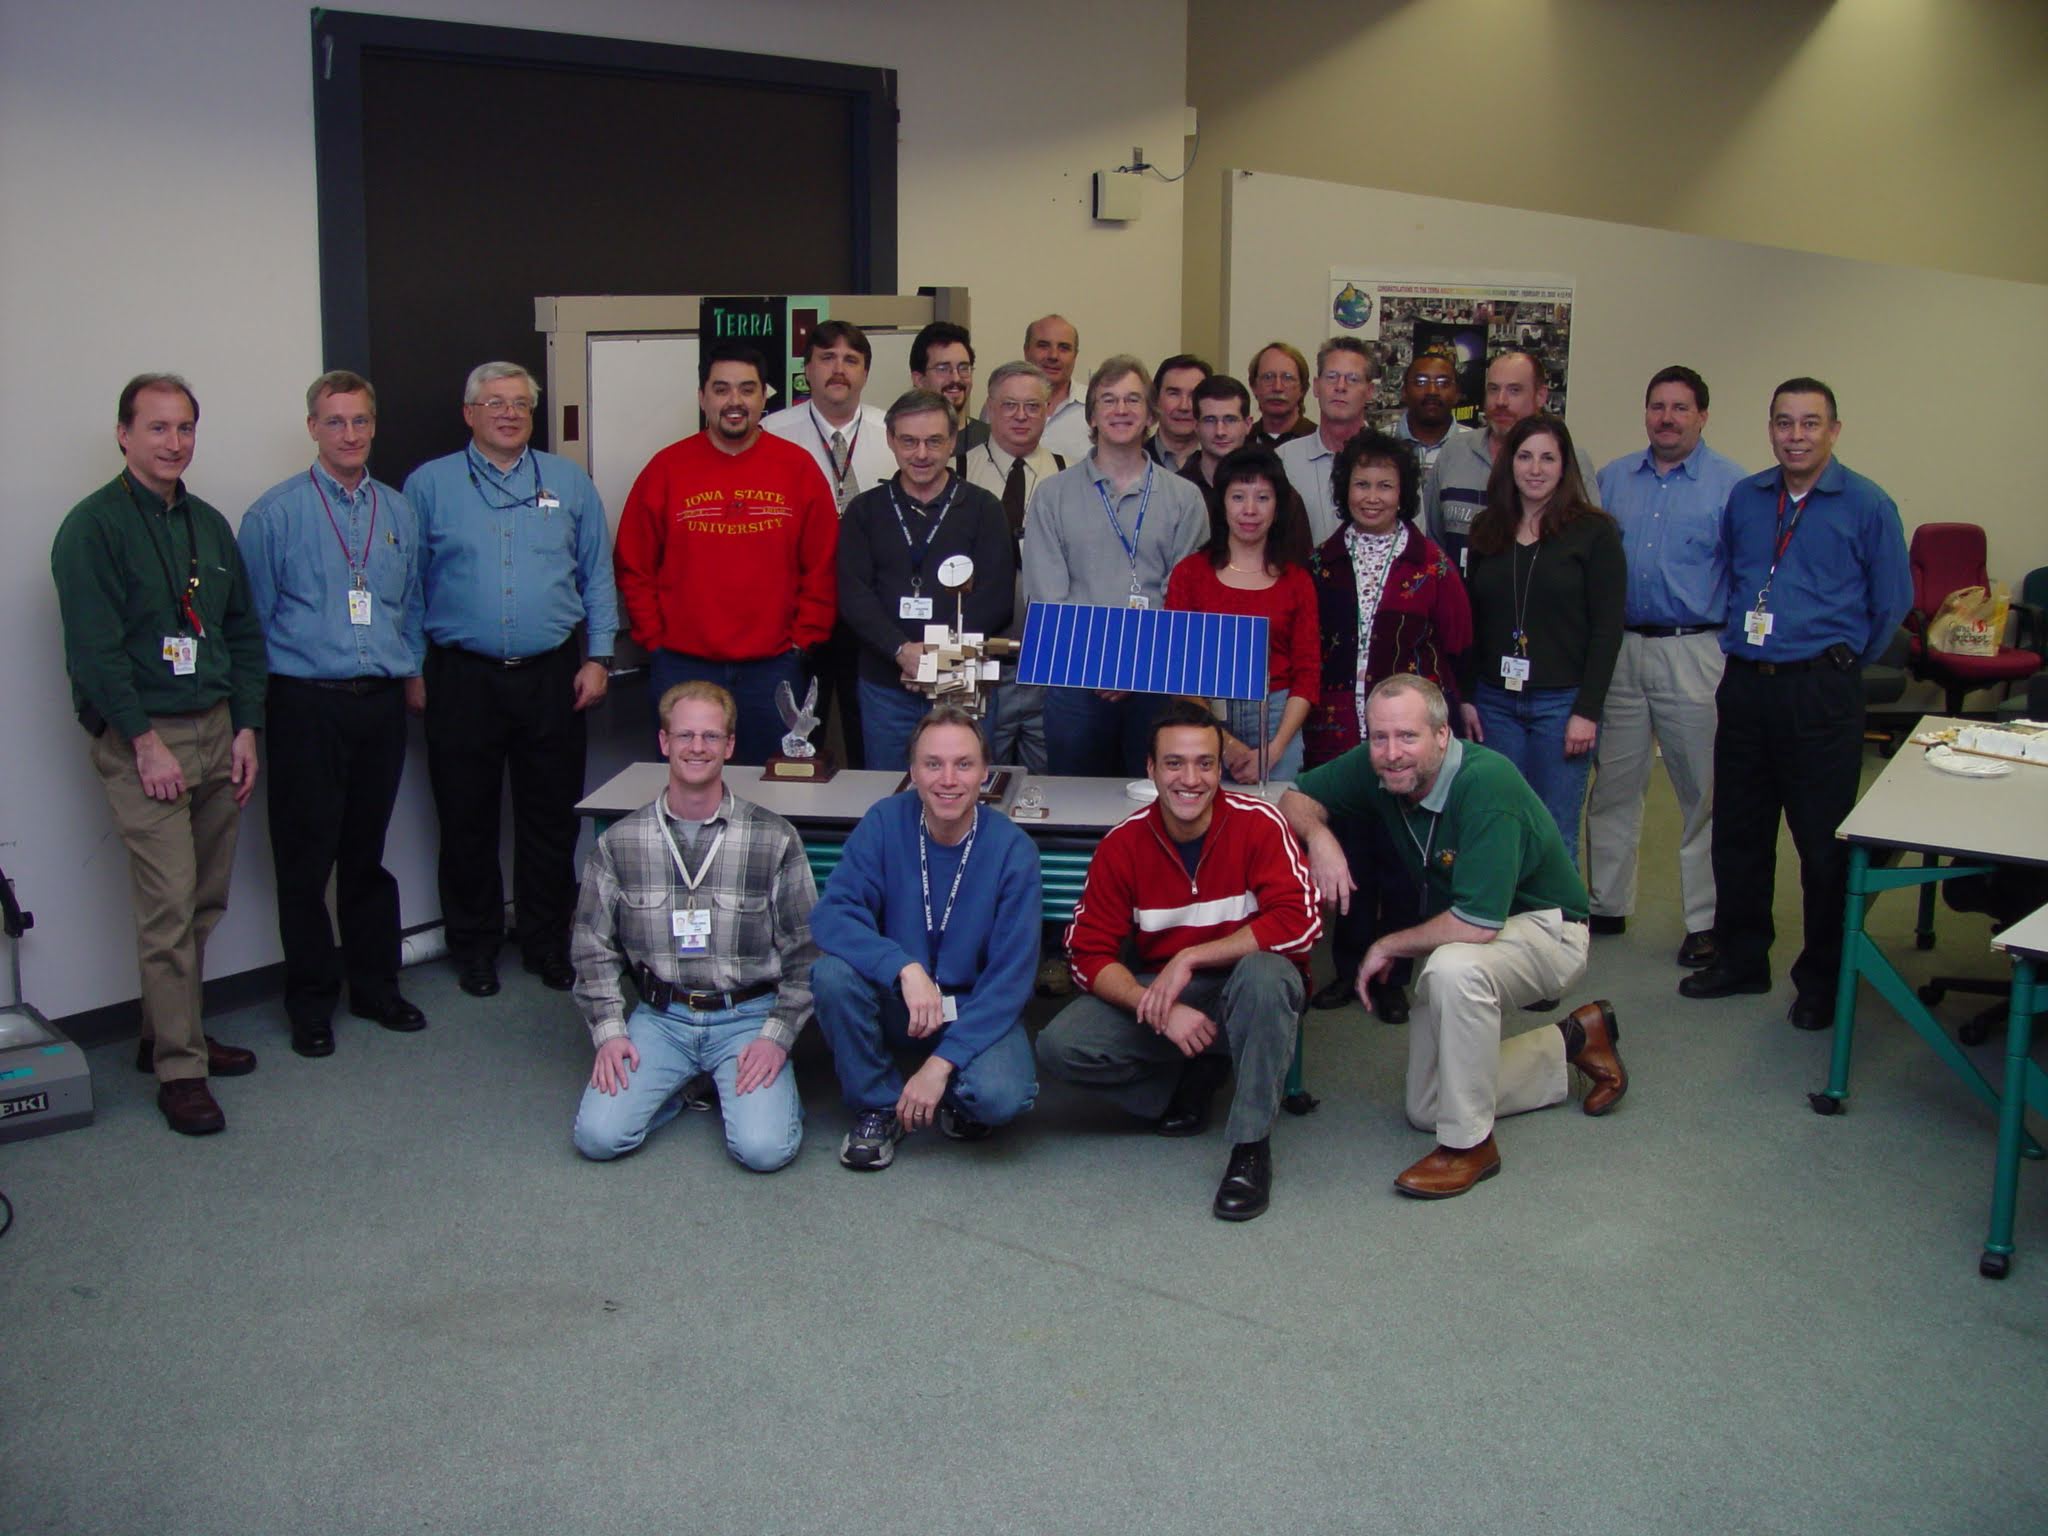 Celebrating the 10th anniversary of Terra in 2009, the flight operations leads and managers posed around a model of the satellite.